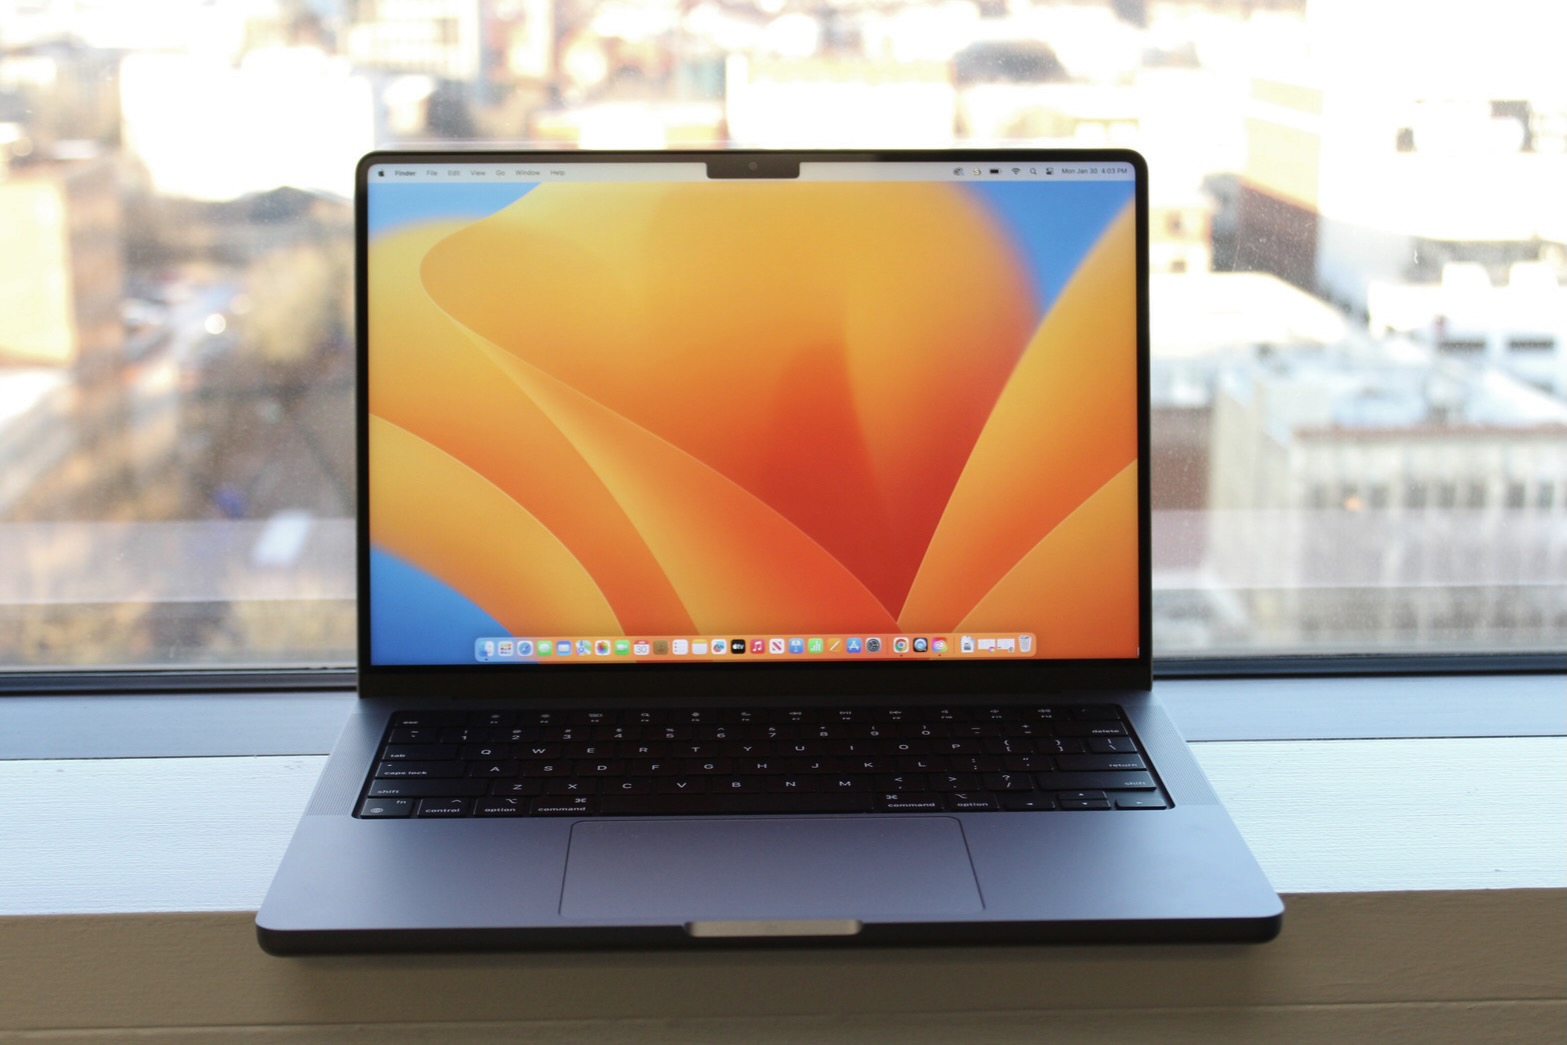 MacBook Pro M2 Pro/M2 Max buying guide: how to make the right choice